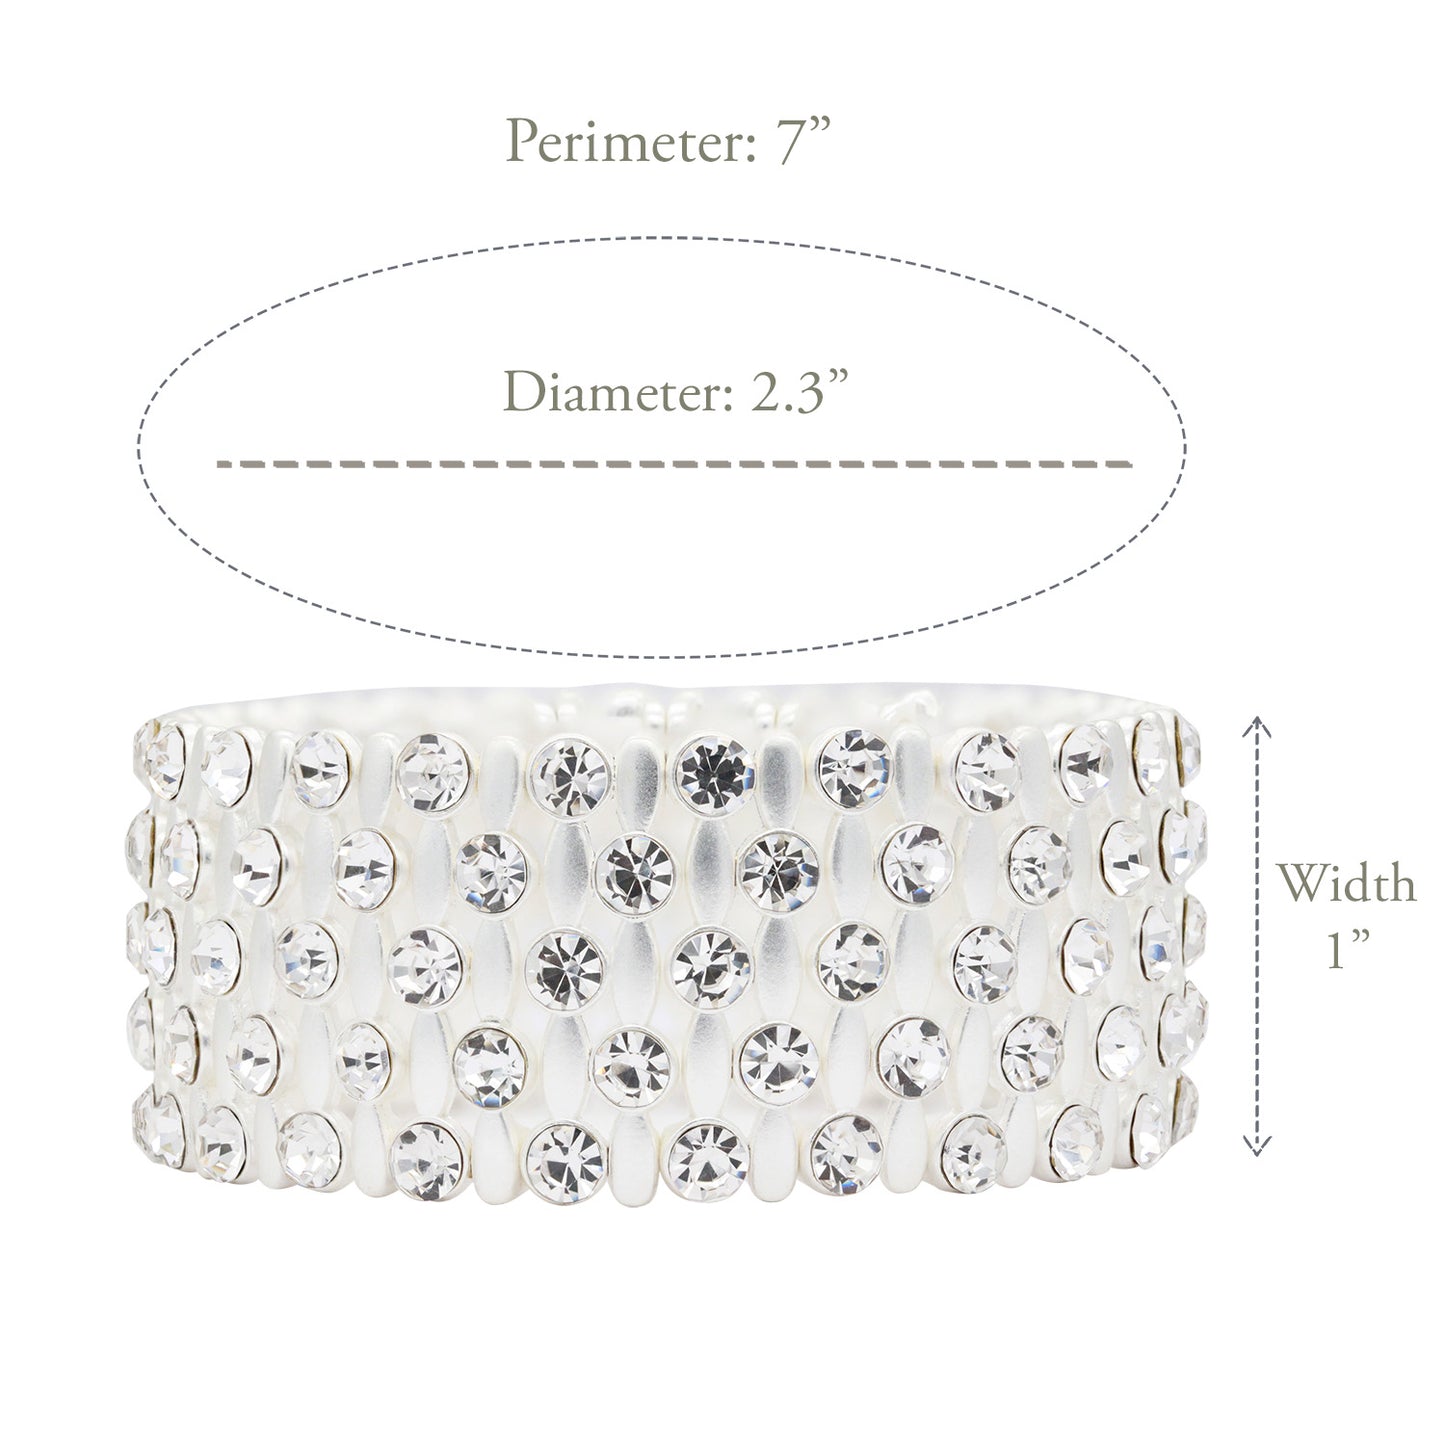 Lavencious Classic Design Elastic Stretch Bracelet Paved with Rhinestones Bridal Wedding Jewelry for Women 7"(Matte Silver)